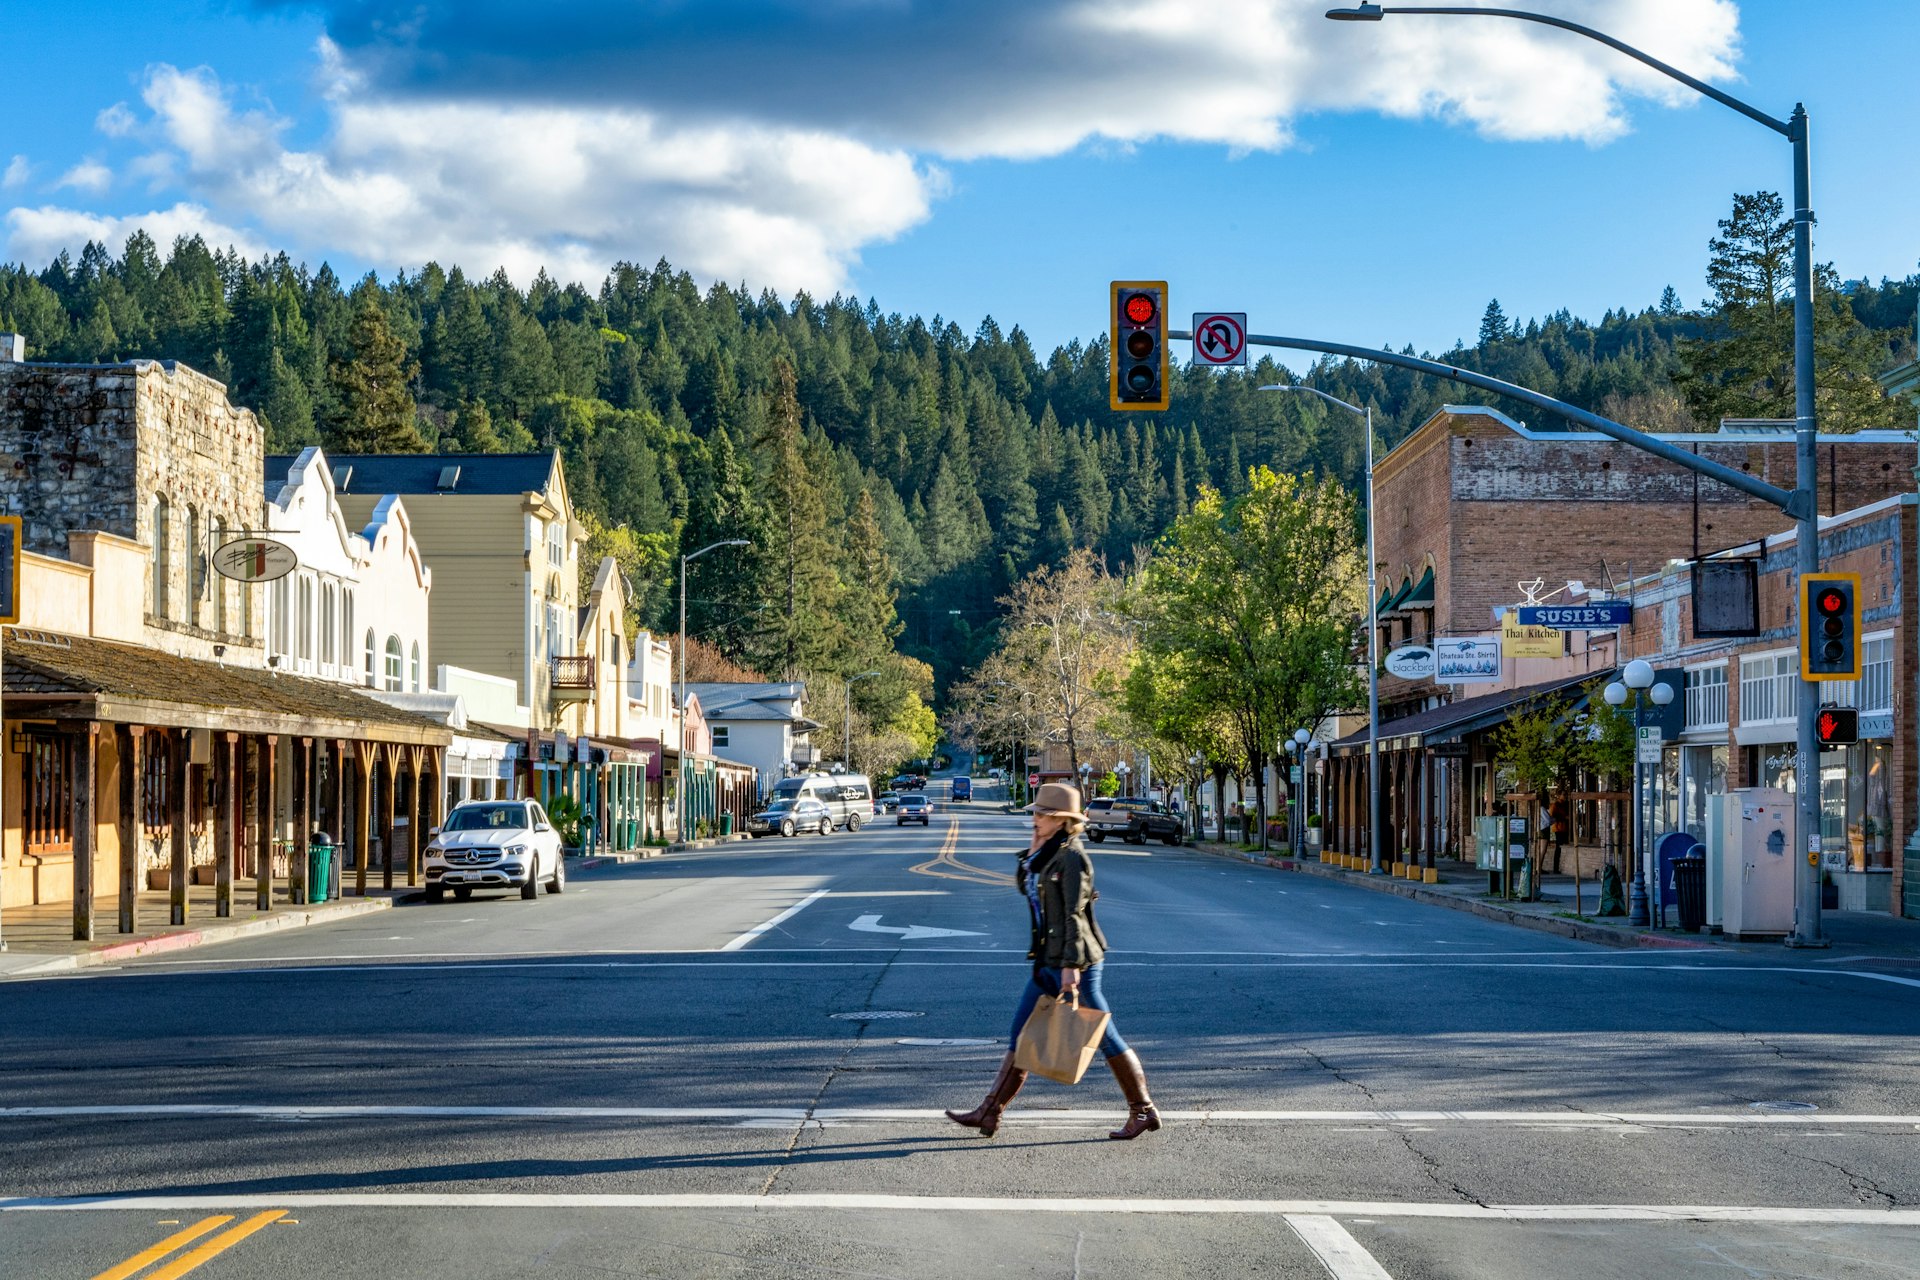 A woman in a hat, jacket, and boots crosses the street in quaint downtown Calistoga, California, with tall pines in the background